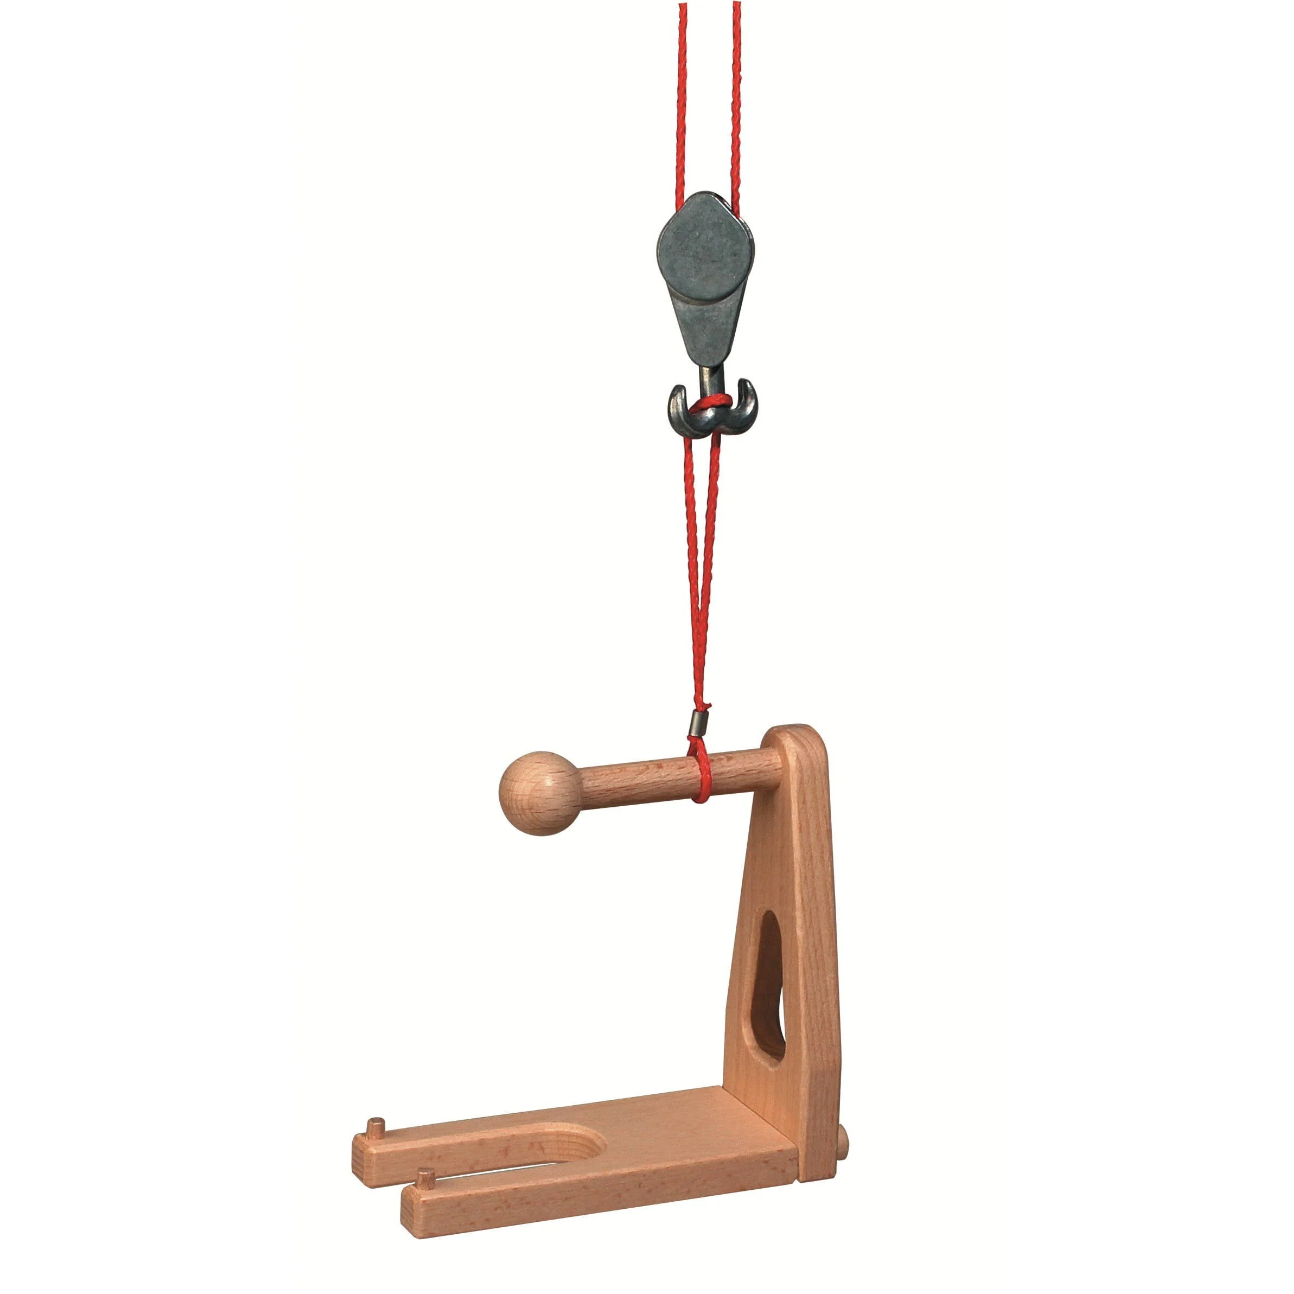 Fagus Loading Fork Extension for Cranes | Wooden Toy Vehicle Accessory